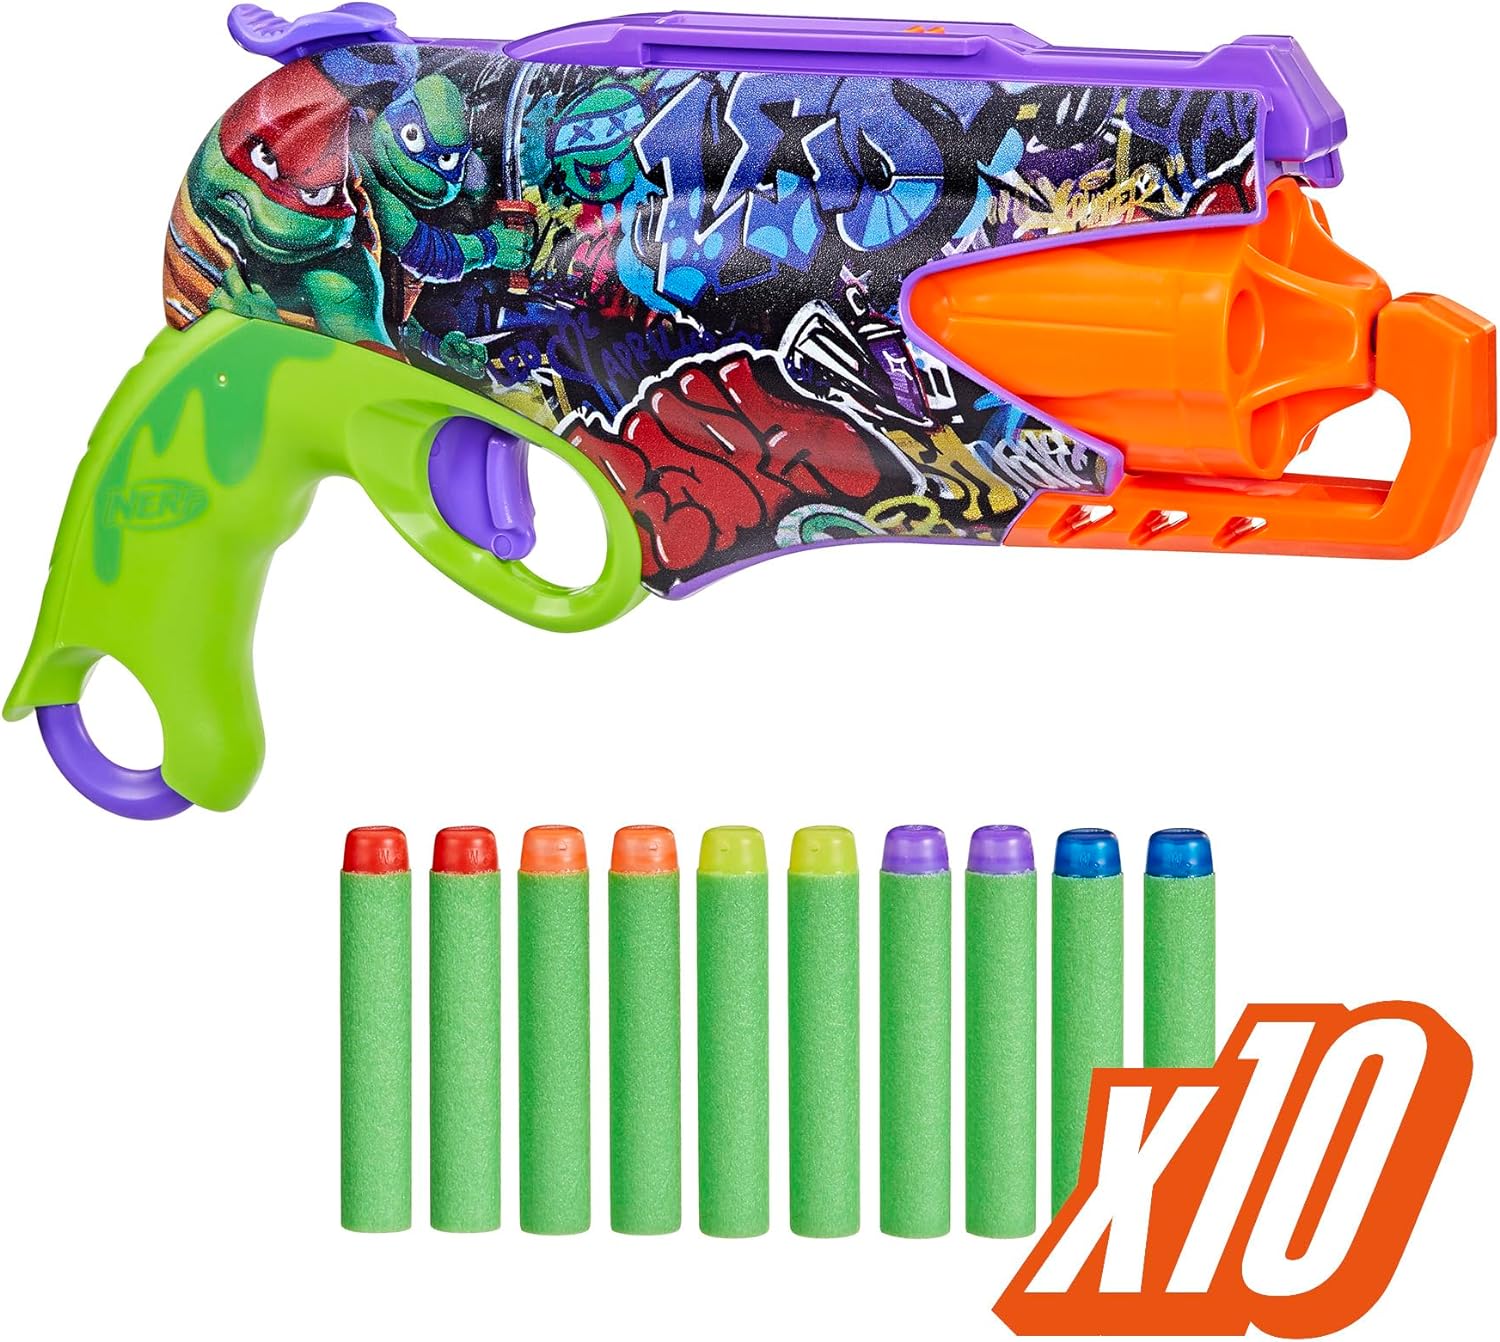 I bought one of these for each of my sons and they loved them! They come with darts that are cool colors and work very well. They shoot on the lighter side, about 60 fps, and are great for indoor play or close range outdoor. Easy enough for my 8 year old to use.